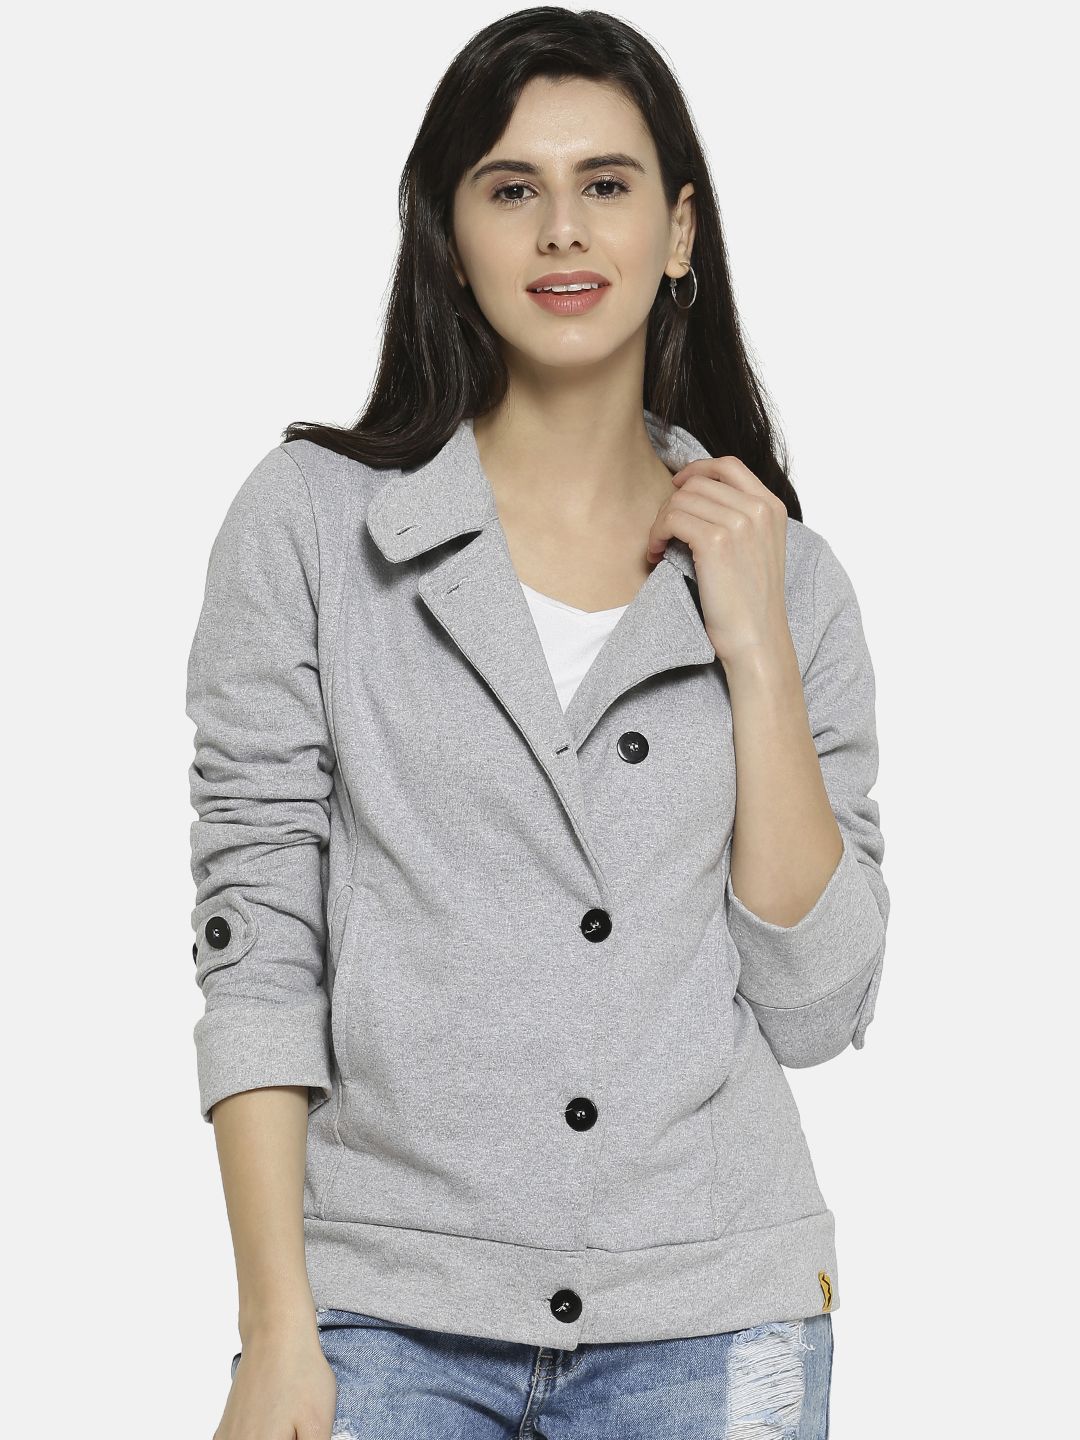 Campus Sutra Women Grey Solid Tailored Jacket Price in India